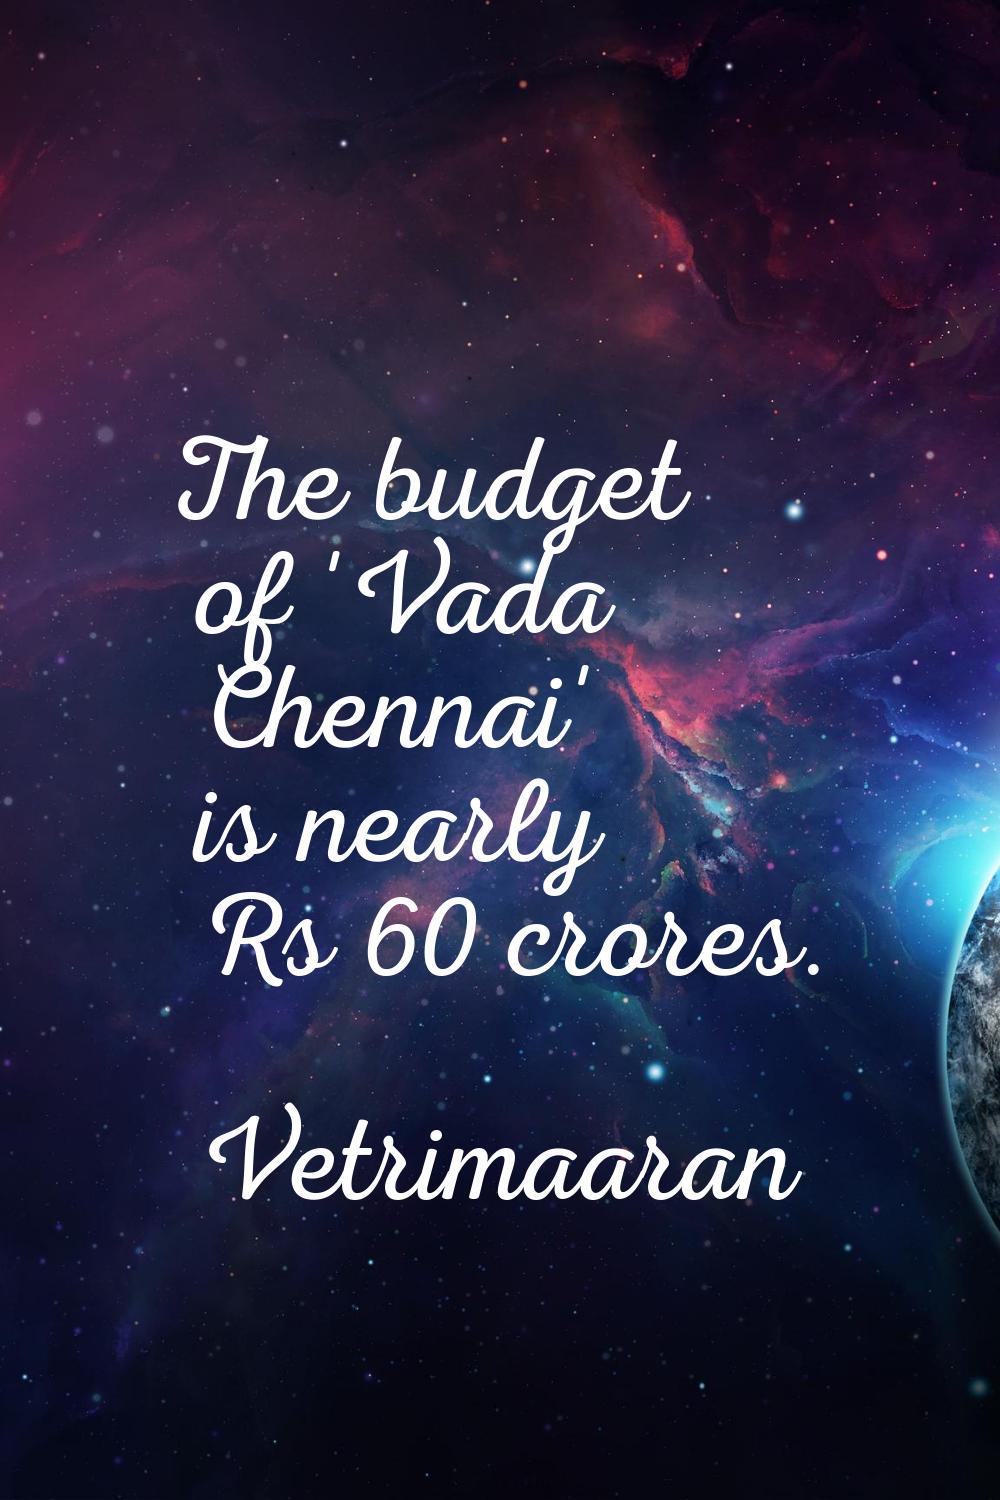 The budget of 'Vada Chennai' is nearly Rs 60 crores.